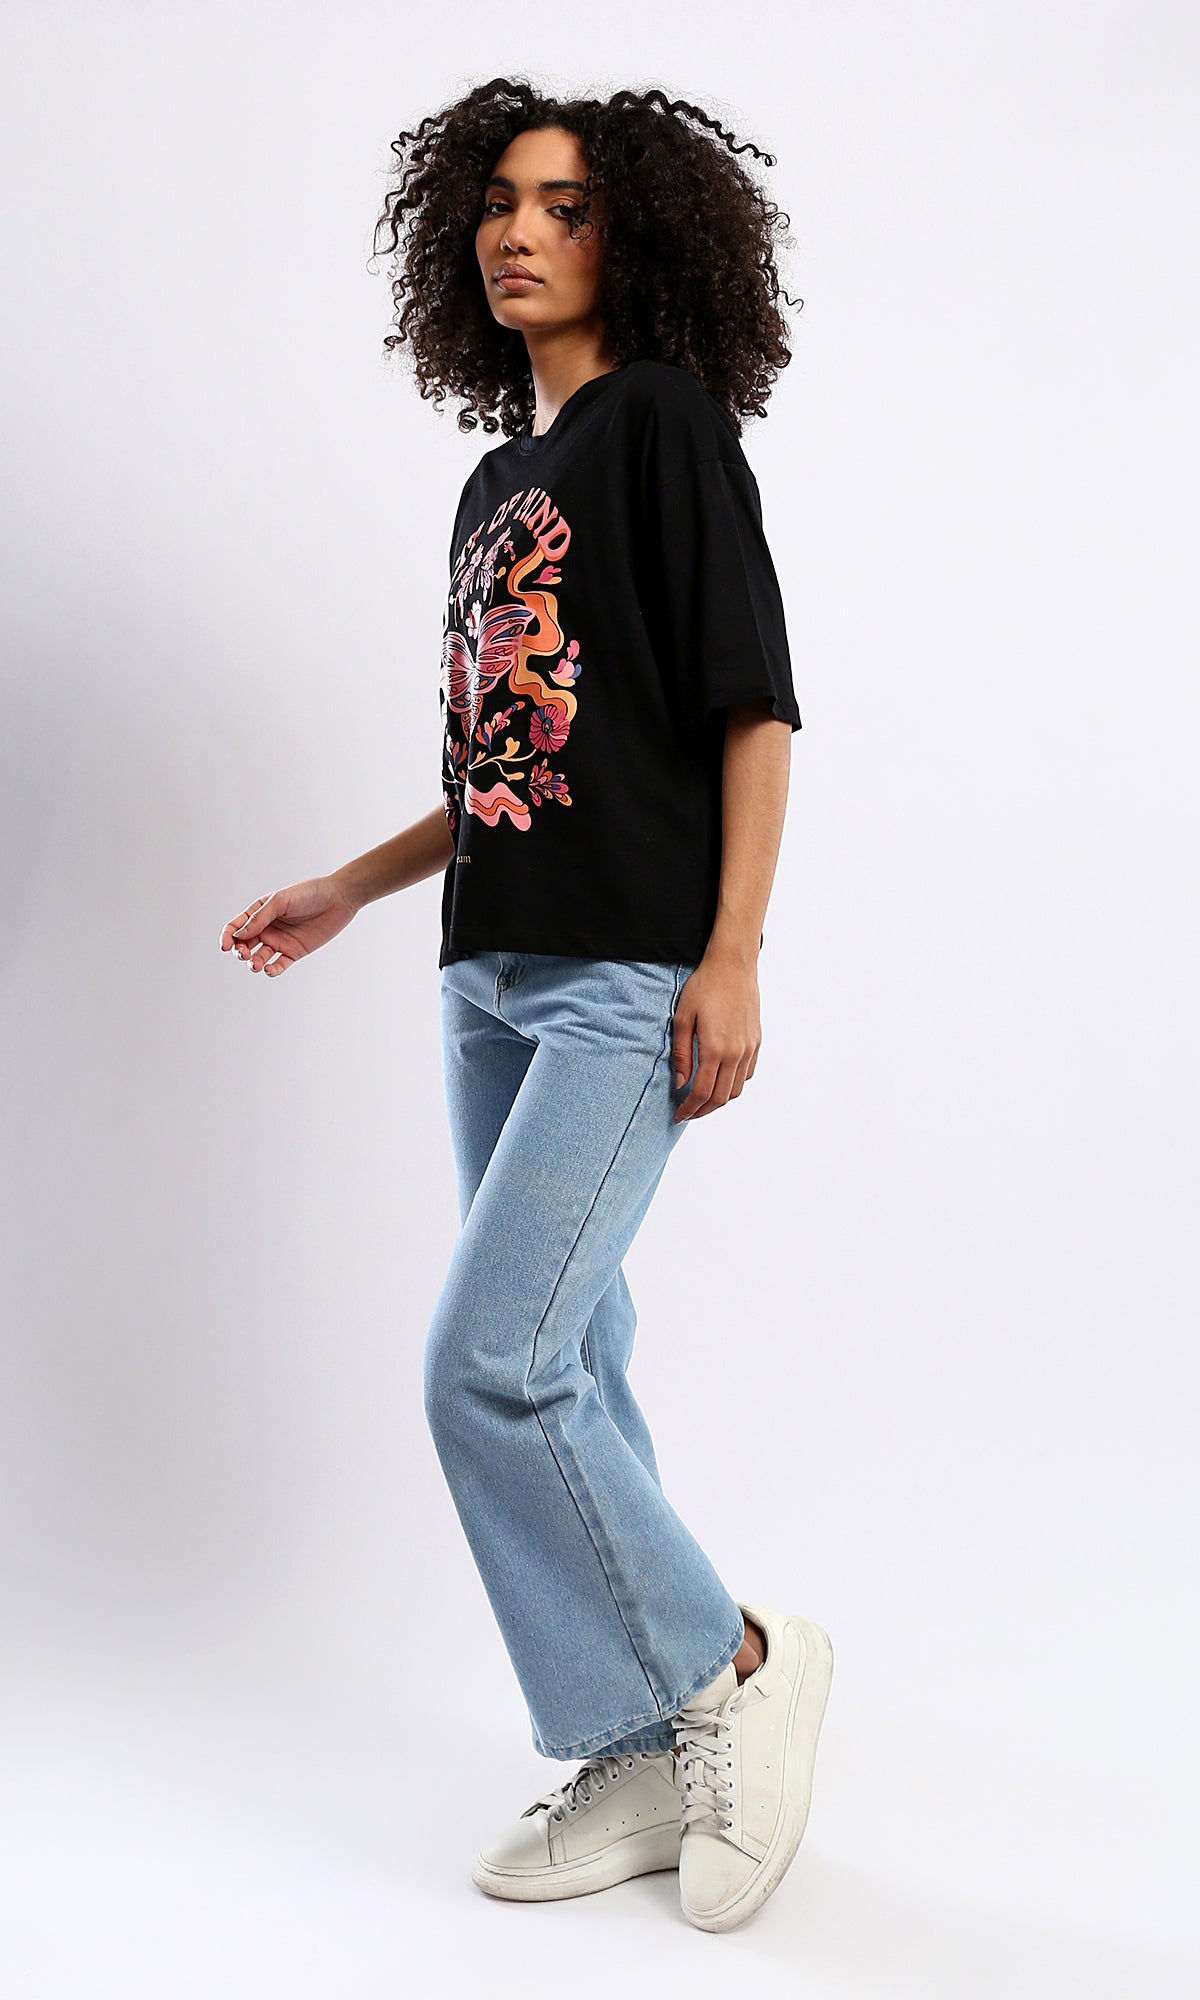 O181668 "Out Of Mind" Colorful Print Black Relaxed Fit Tee